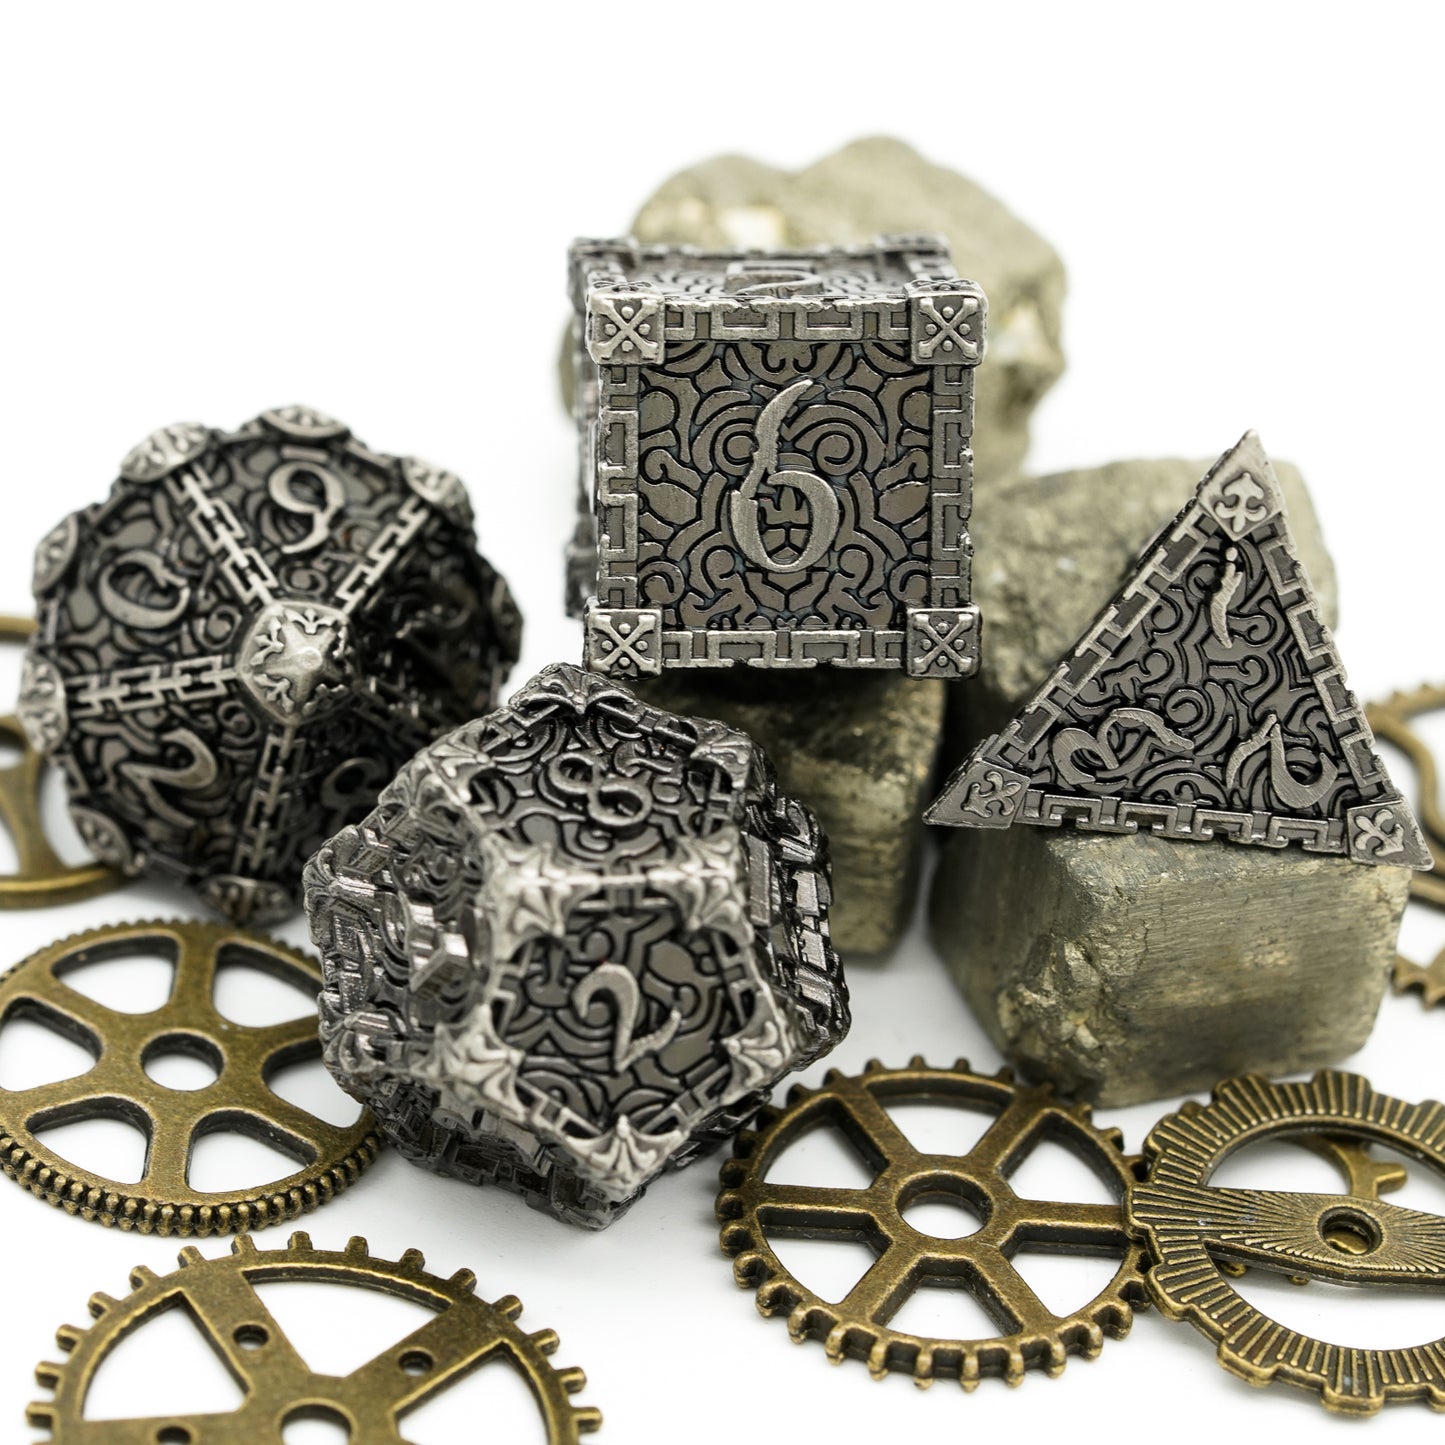 4 metal dice, stone color, displayed on gears and rocks